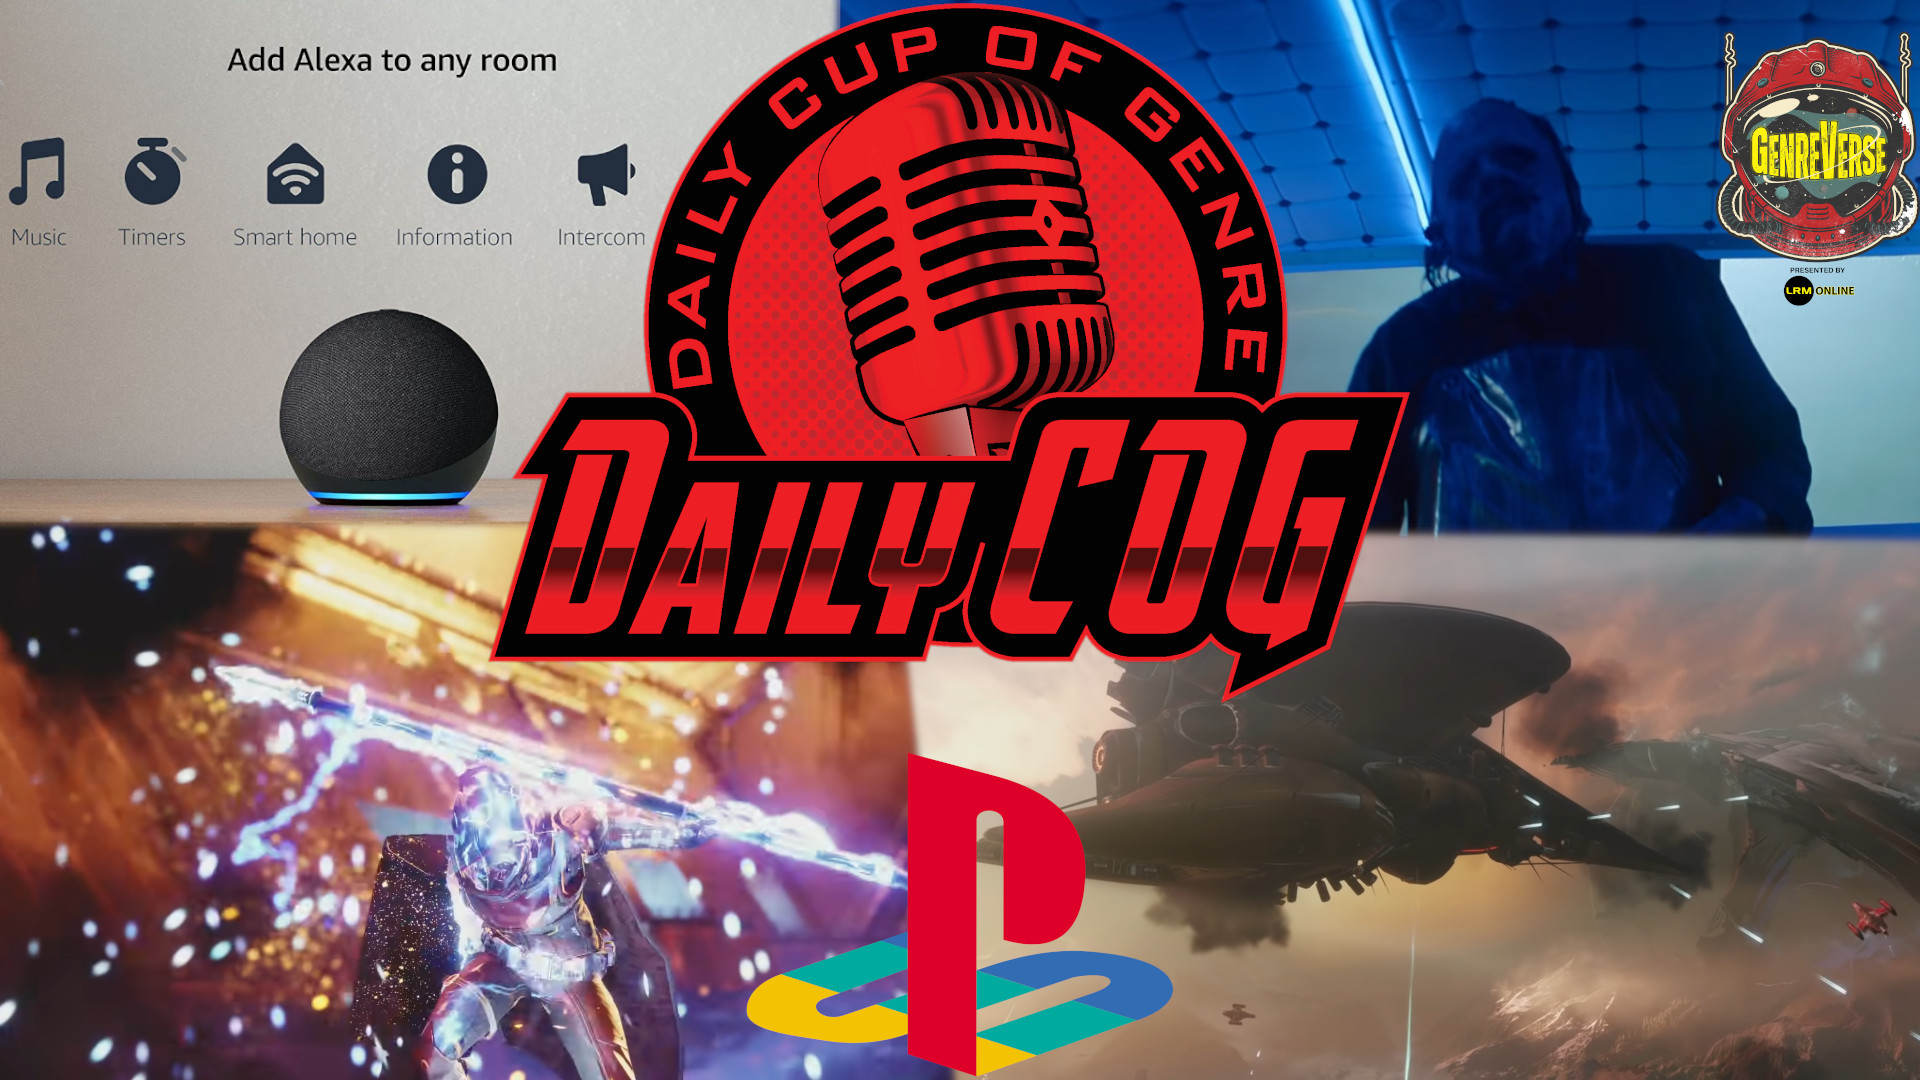 Tech Tuesday Is Back Sony Buys Bungie, Alexa Down Time And Dangers Of Connectitivty, And Texas Chainsaw Massacre Trailer Reaction Daily COG Video Mixdown